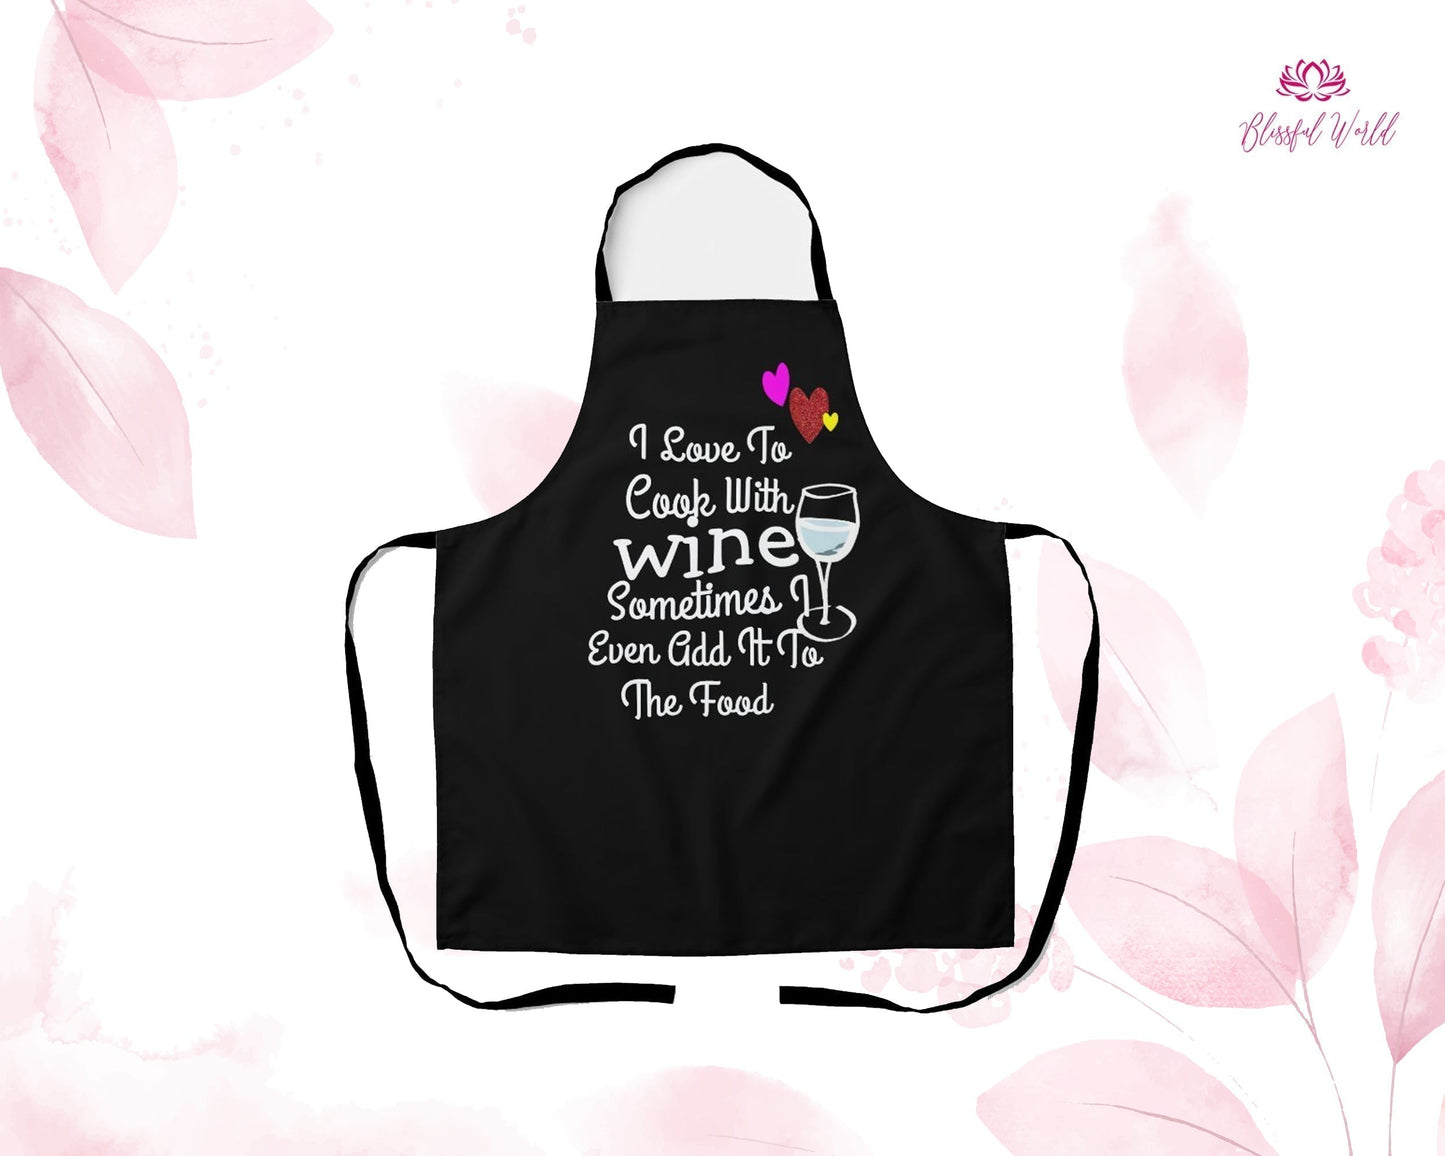 Personalized Floral Design Apron, Mother’s Day Gift, Kitchen Apron with Pocket, Gift For Her, Personalized Gift Mom, Apron for Mom